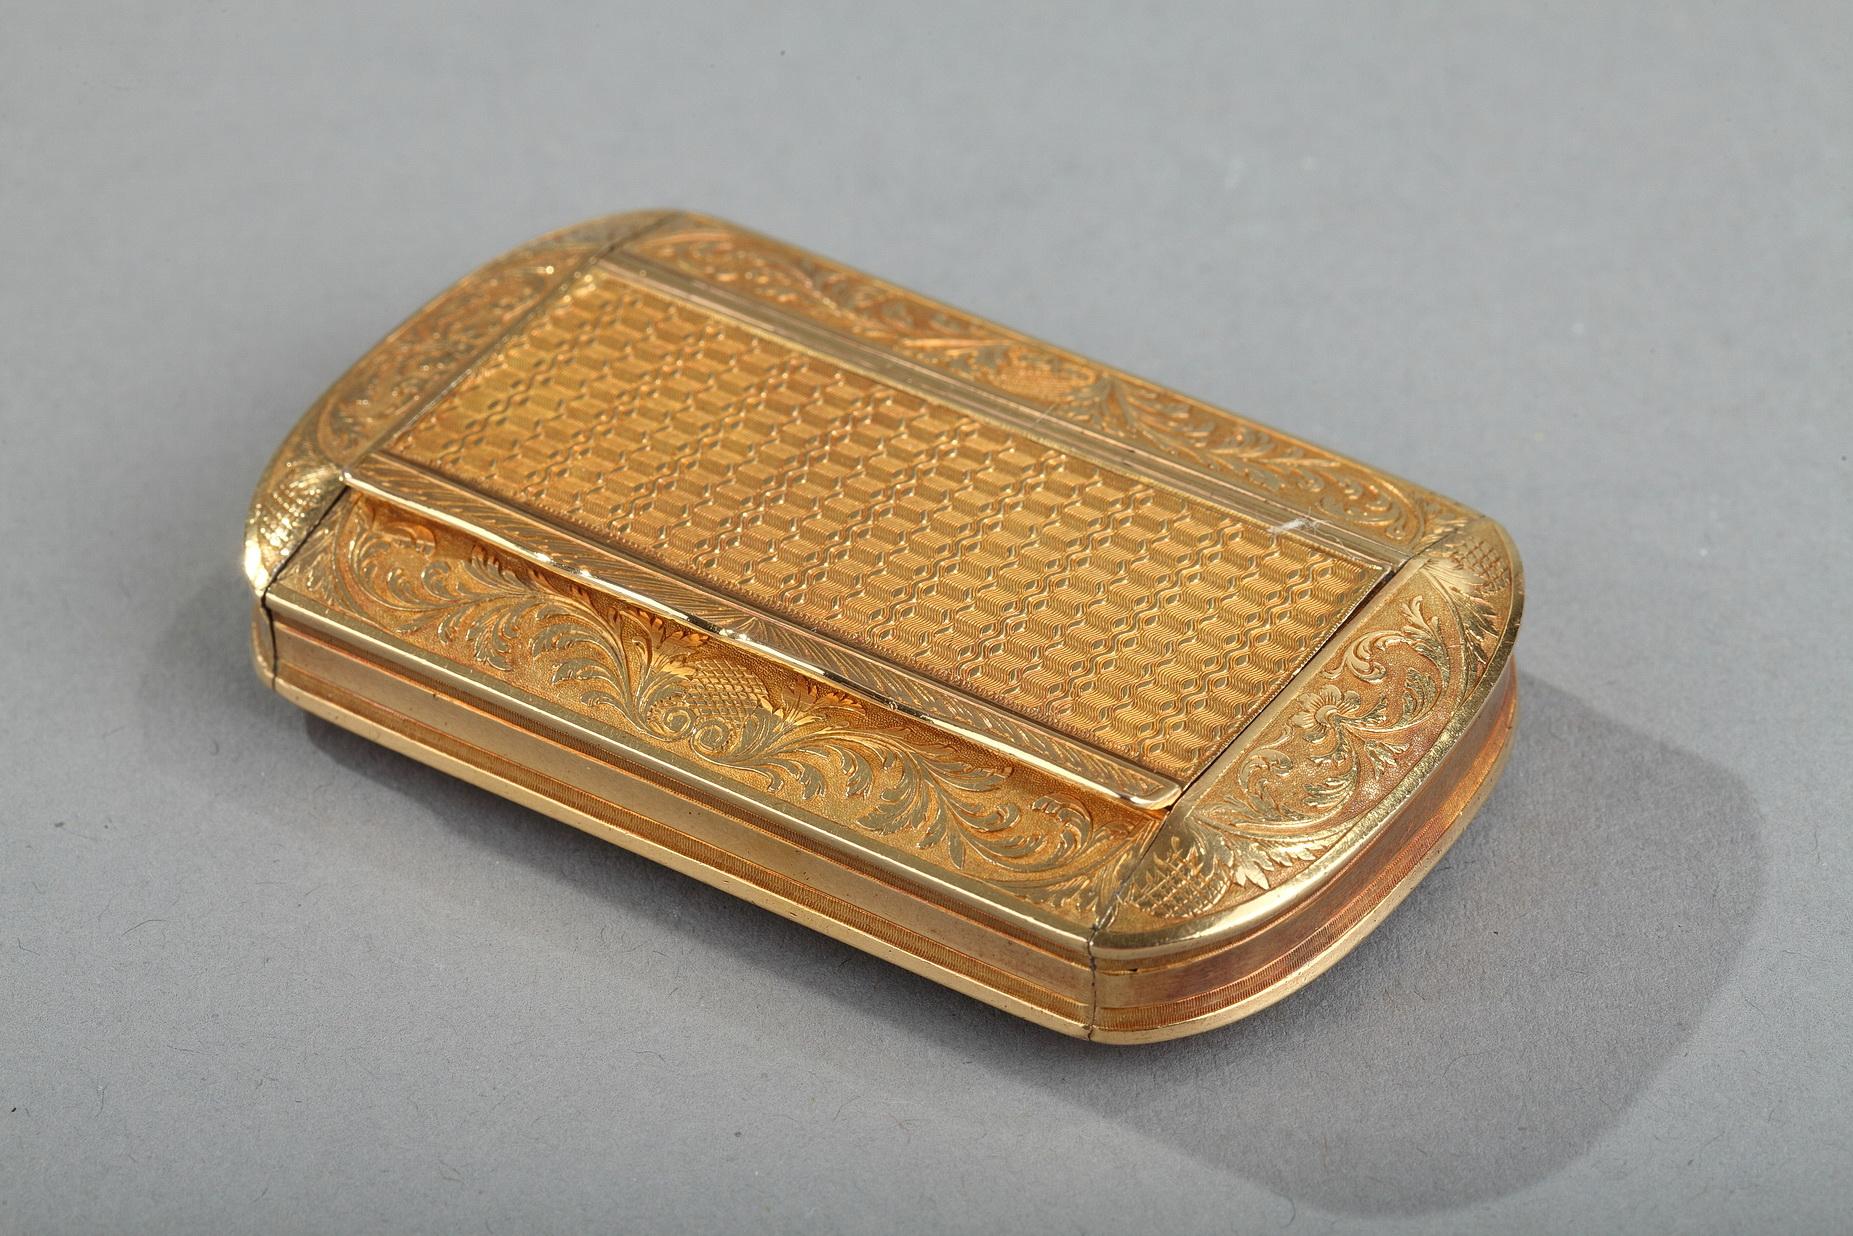 Rectangular box with rounded corners. The hinged lid as well as the bottom are embellished with an intricate geometric pattern framed with rinceaux motifs on a matte gold background. A button serves to open the box.
Weight: 1.8 oz (52 g)
L: 2.8 in